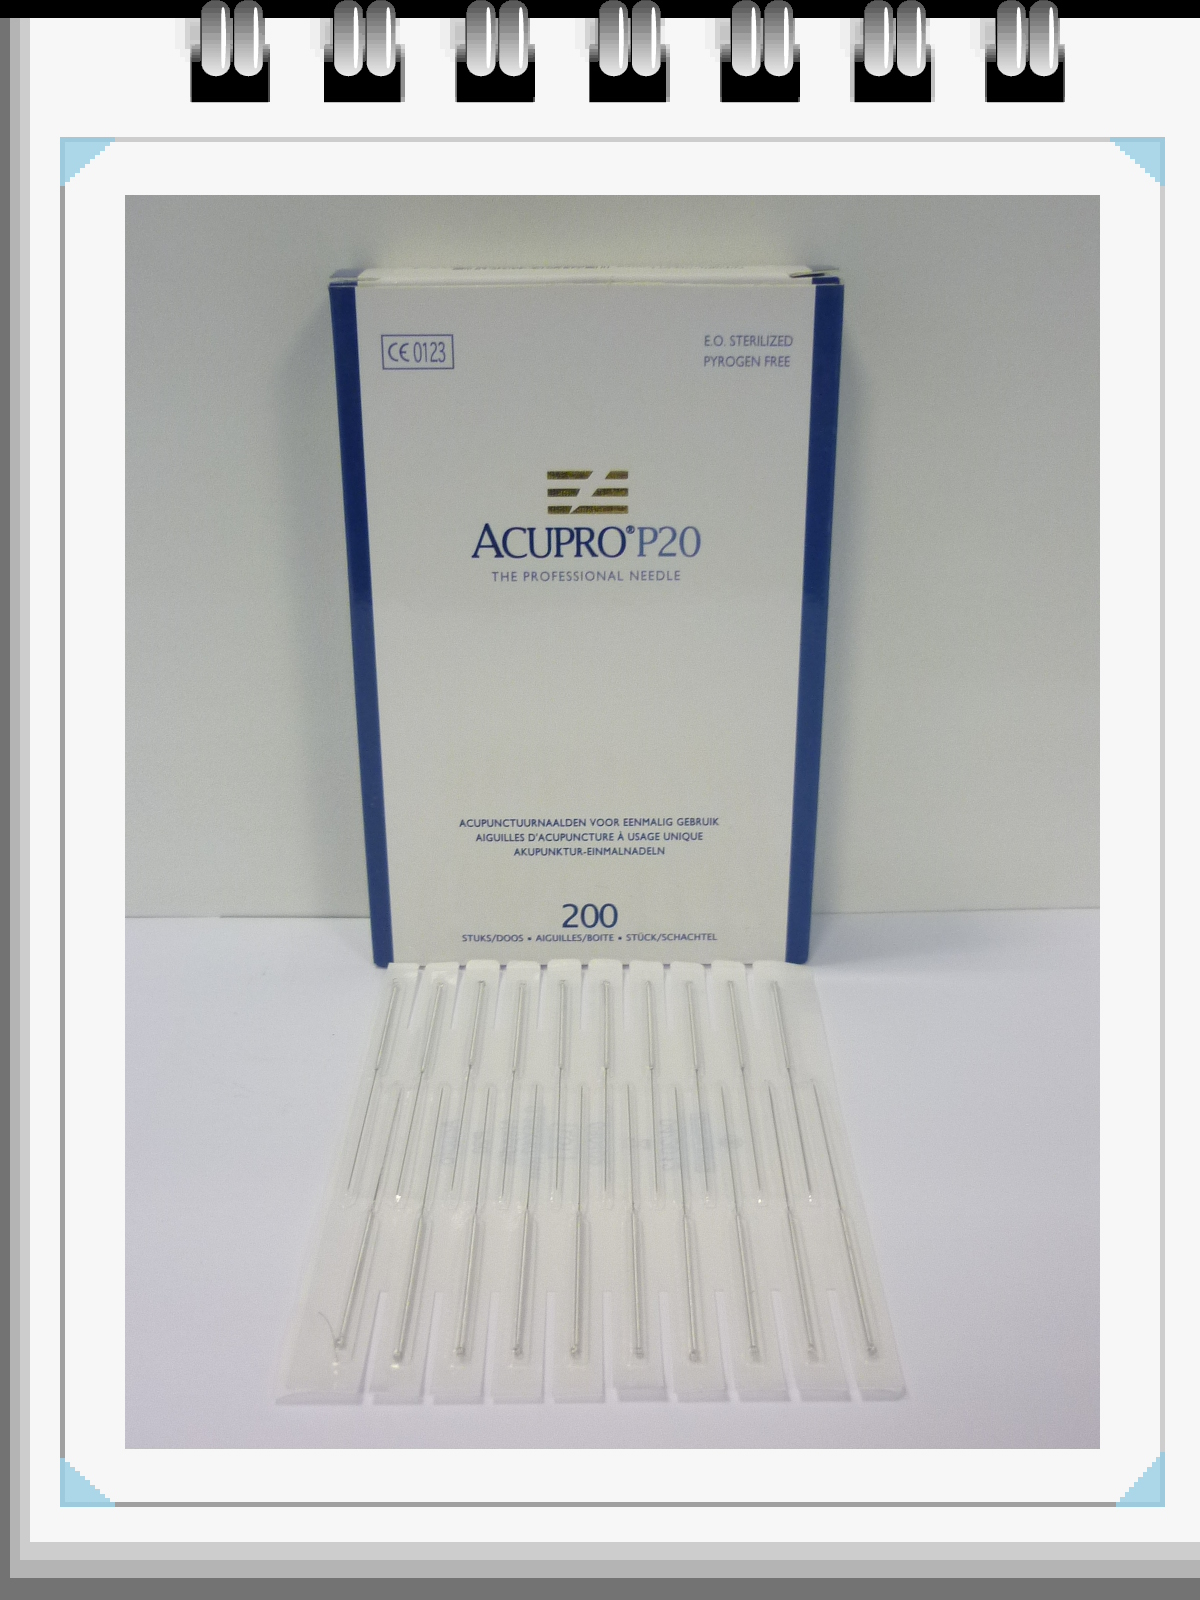 All Products - Acupunctuurnaalden: 0,22 x 50mm, p--200